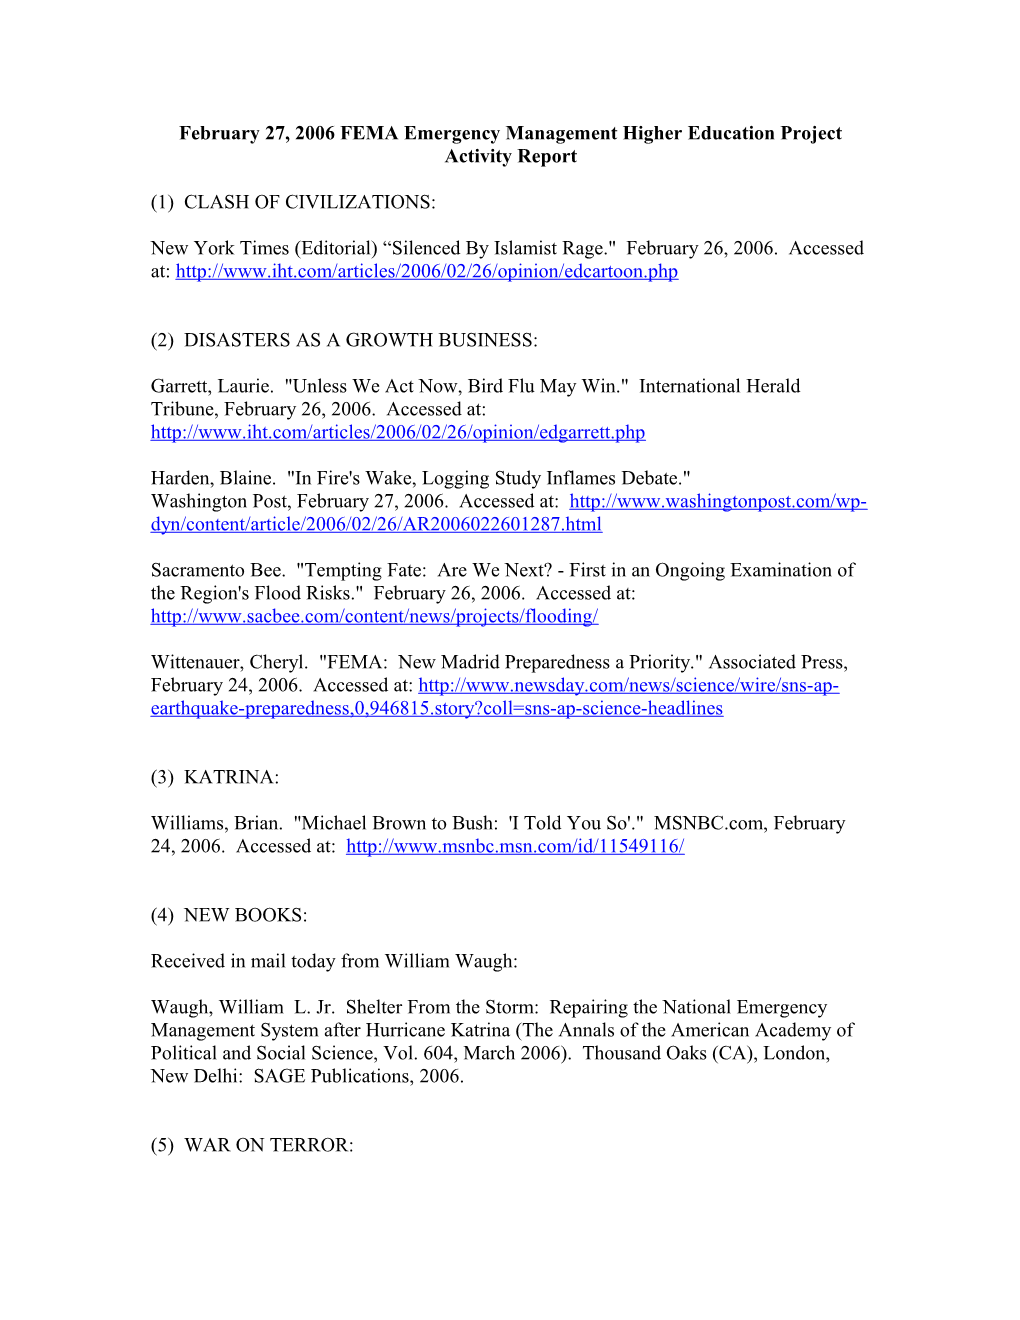 February 27, 2006 FEMA Emergency Management Higher Education Project Activity Report